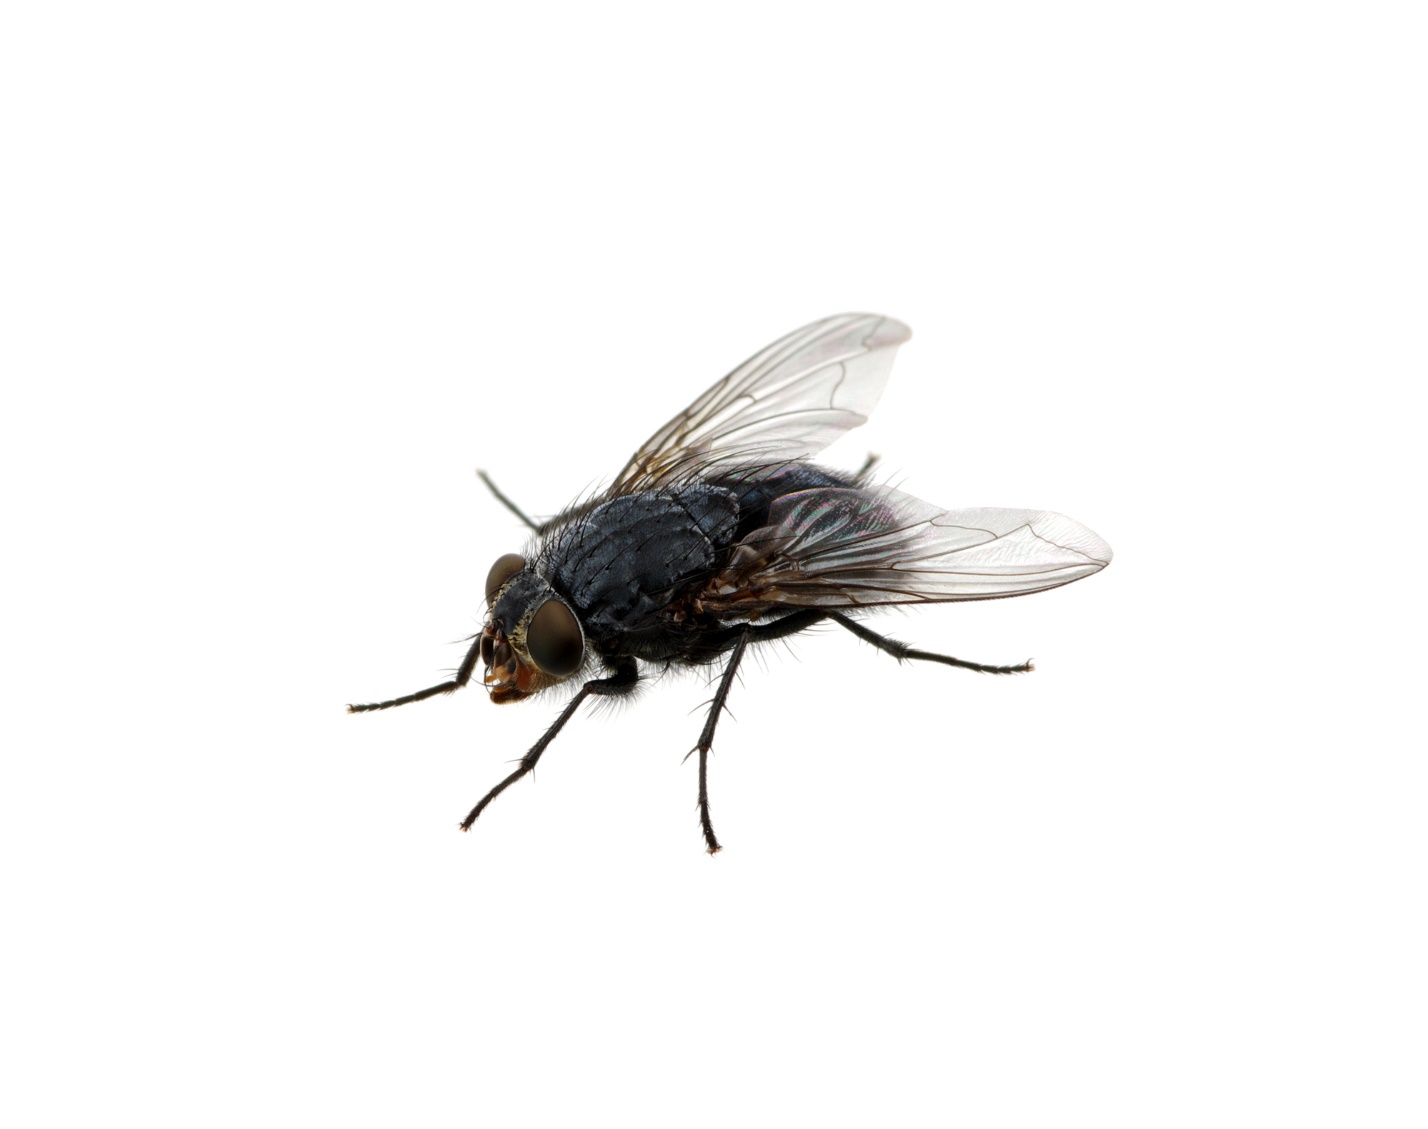 A picture containing insect

Description automatically generated